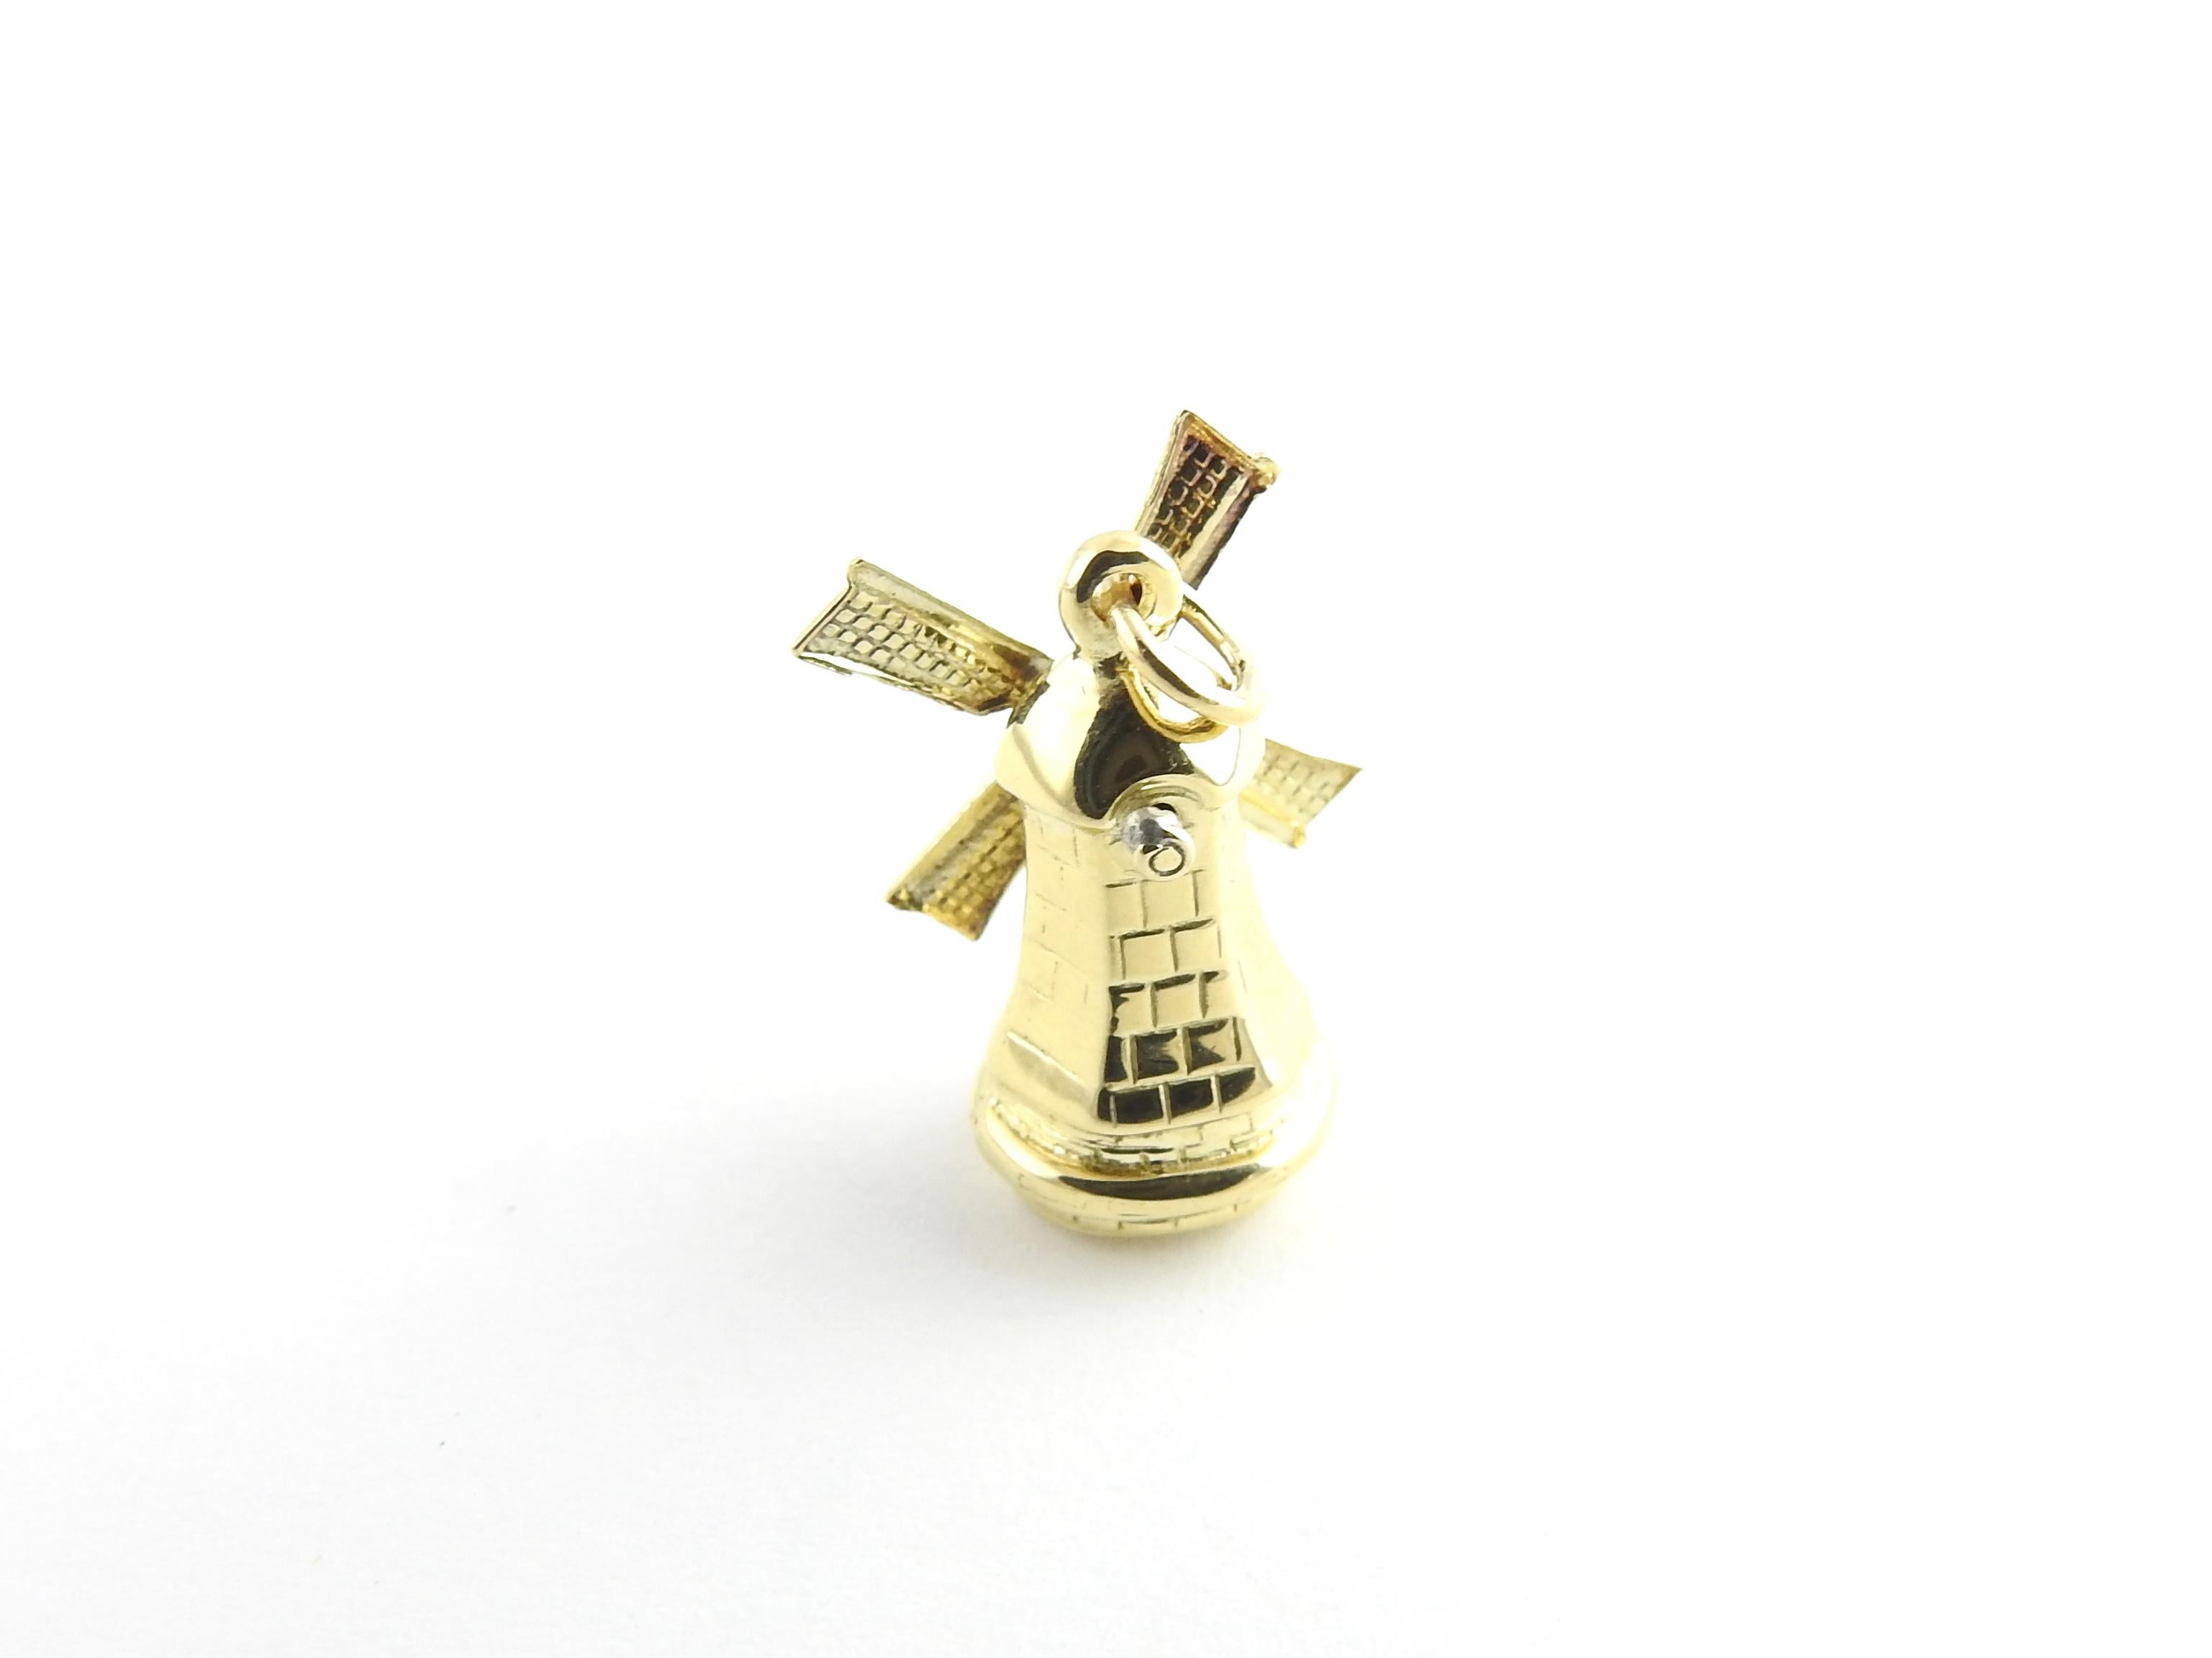 Vintage 14 Karat Yellow Gold Windmill Charm

This lovely 3D charm features a miniature windmill with blades that spin meticulously detailed in 14K yellow gold.

Size: 18 mm x 15 mm (actual charm)

Weight: 0.9 dwt. / 1.5 gr.

Acid tested for 14K